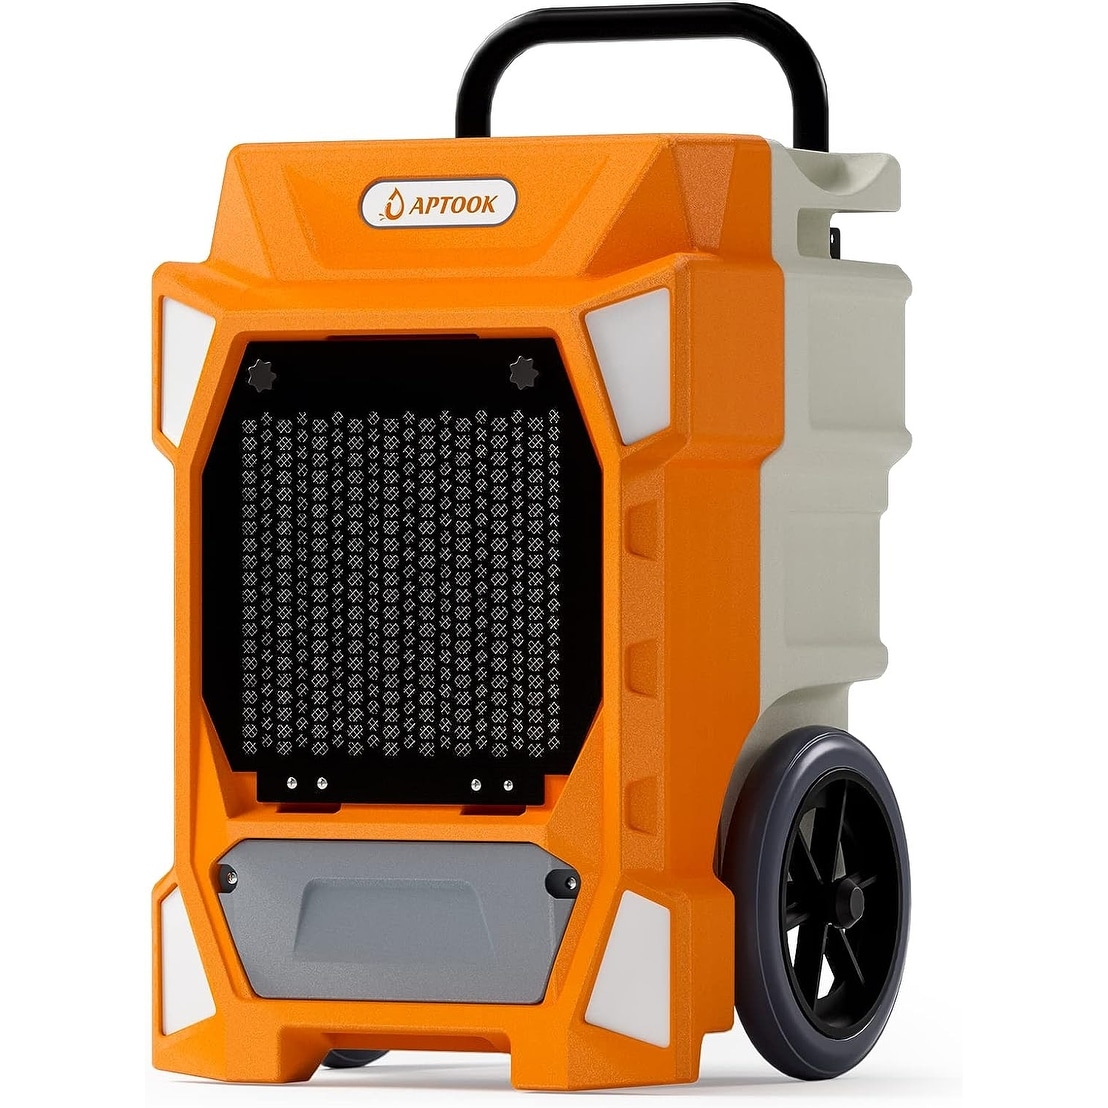 https://ak1.ostkcdn.com/images/products/is/images/direct/a89c472ad14a3117266d6220f1661a1a24d6b14f/190-pt.-Commercial-Dehumidifiers-in-Orange-with-Drain-Hose-and-Pump.jpg